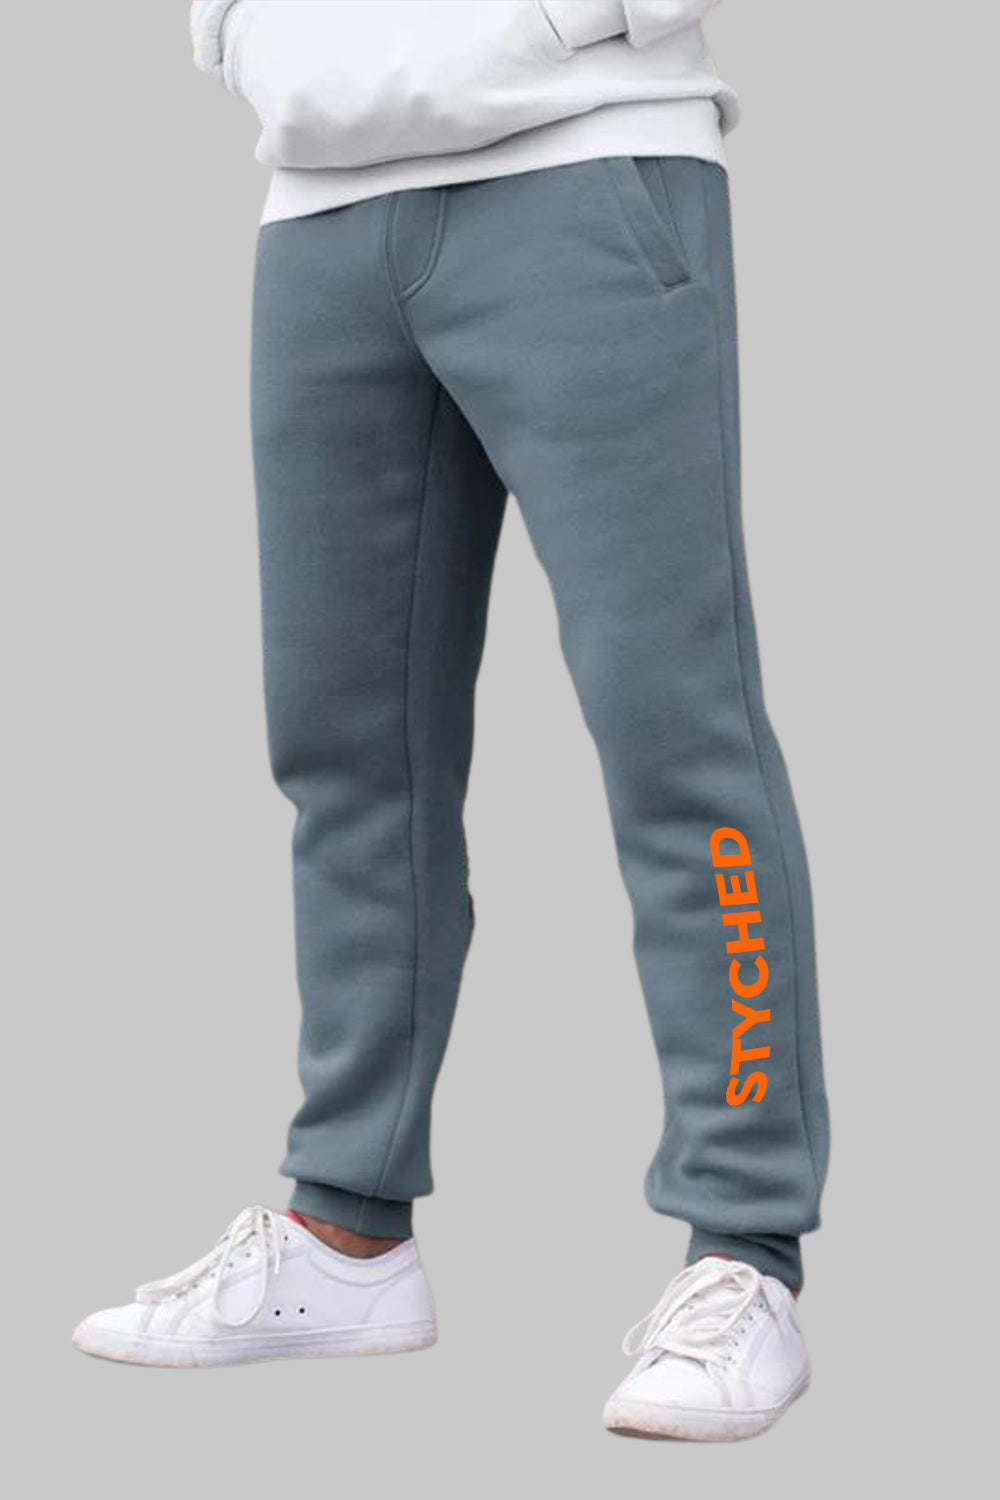 Orange Styched Logo Graphic Printed Blue Grey Joggers